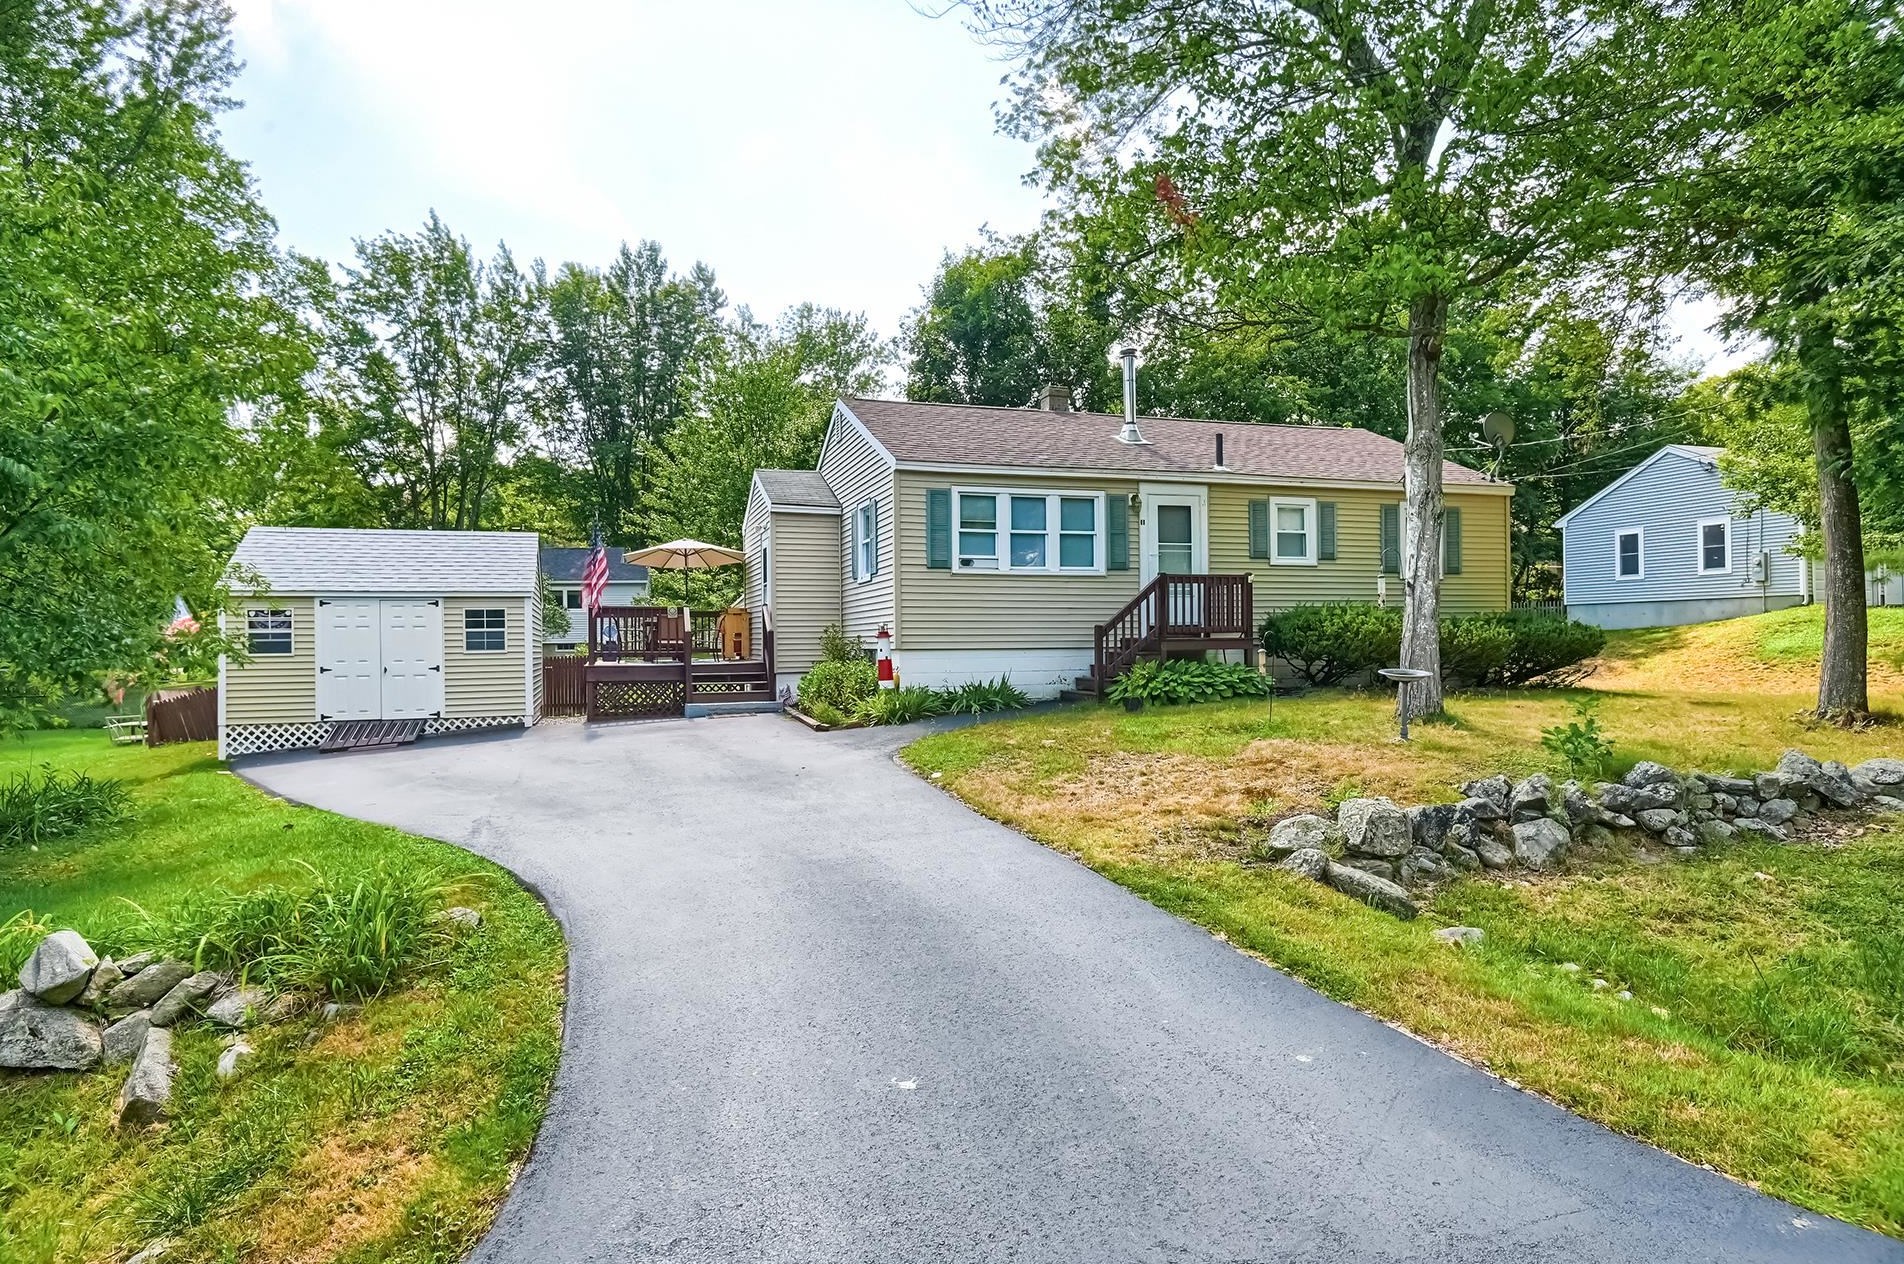 11 Old Lee Rd, Newfields, NH 03856